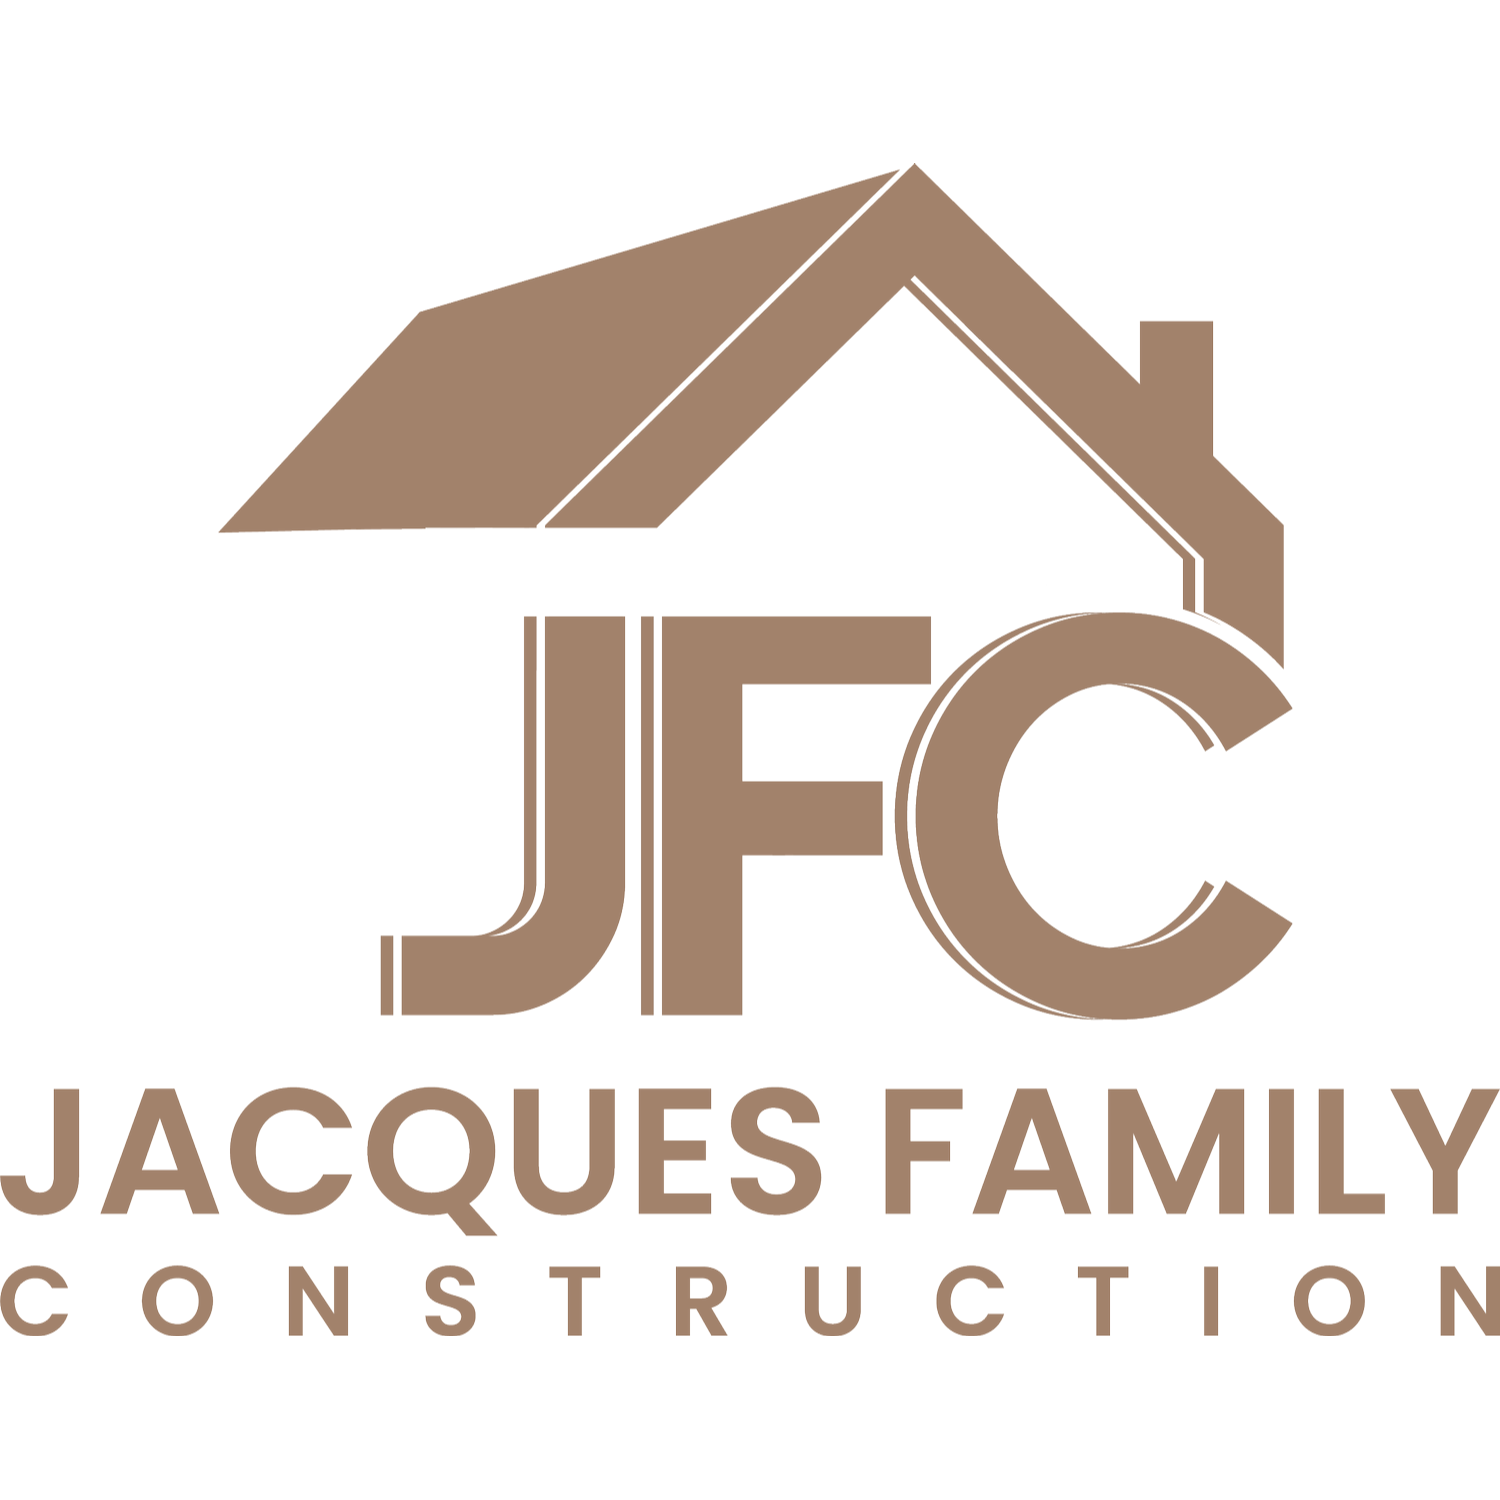 Jacques Family Construction Custom Home Builder and Remodeling Contractor - Fort Collins, CO 80525 - (970)556-5503 | ShowMeLocal.com